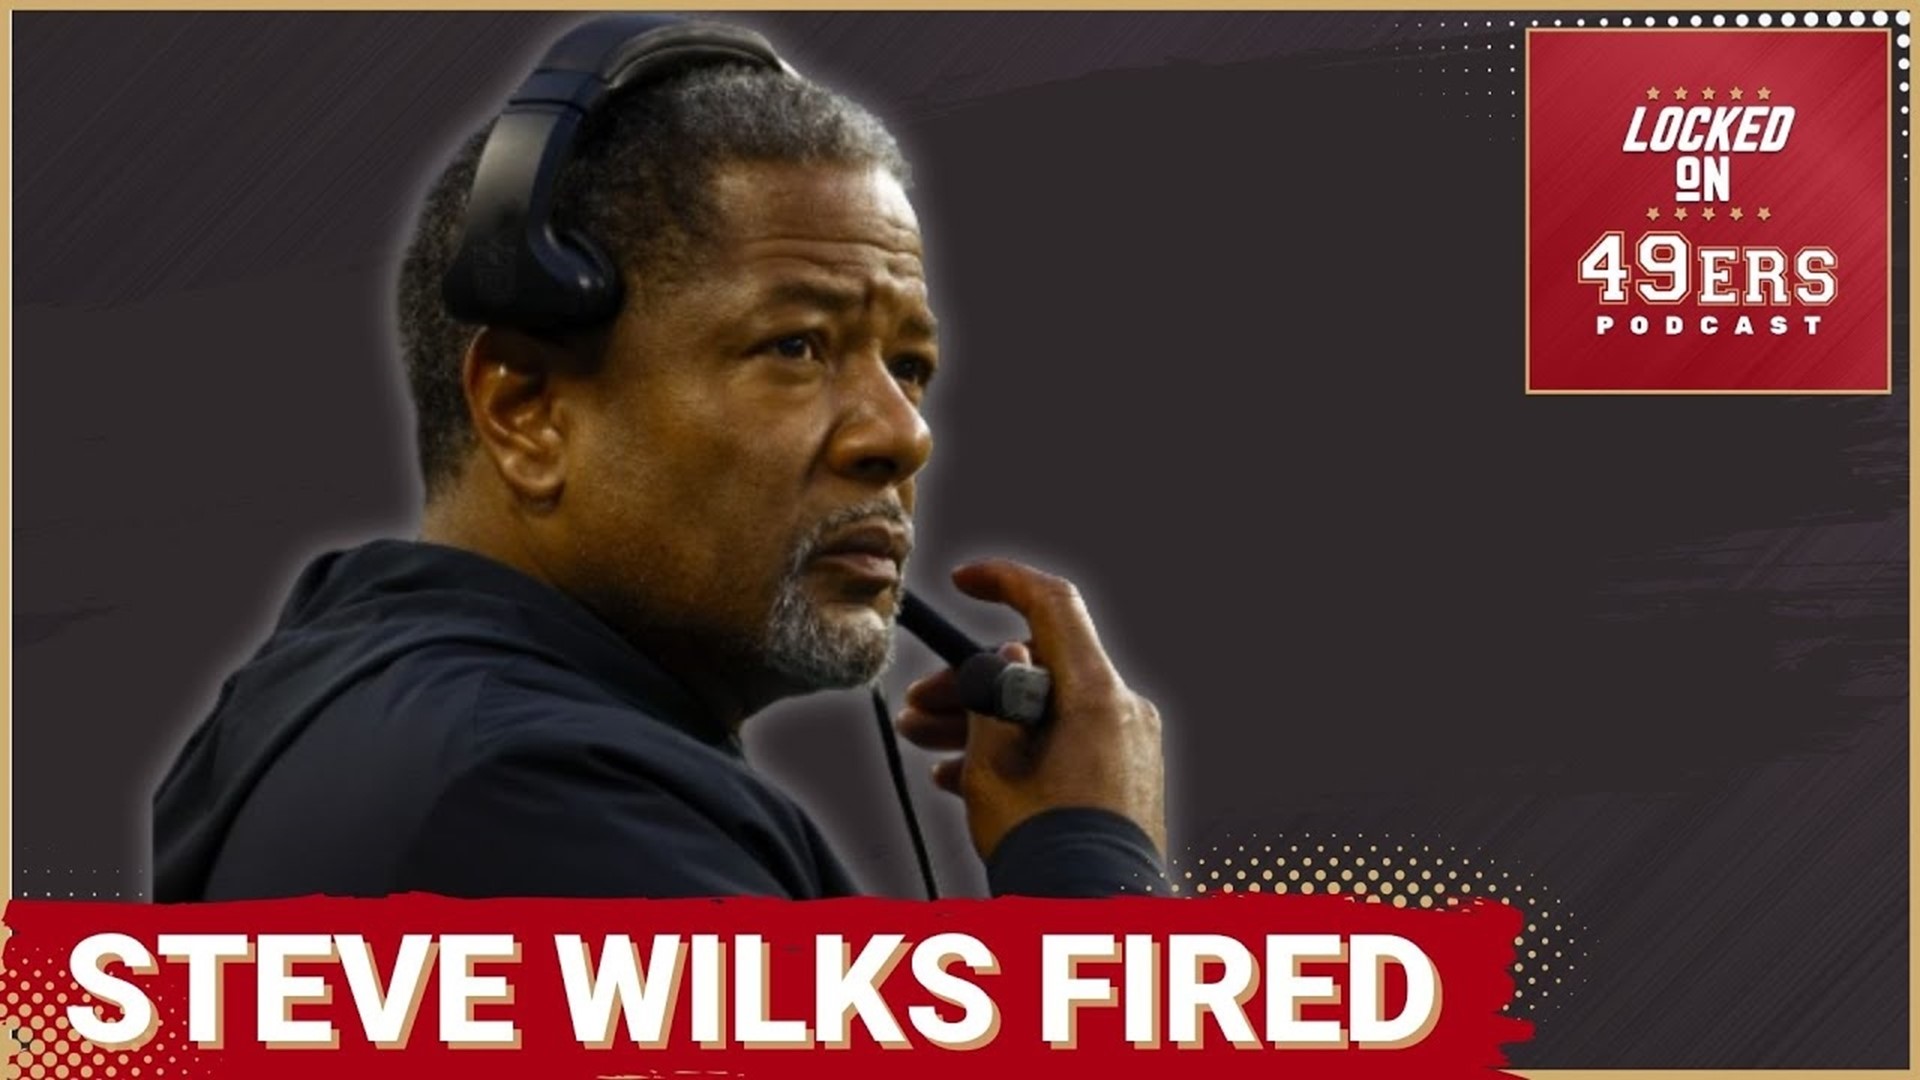 On the heels of a Super Bowl loss, the San Francisco 49ers have FIRED defensive coordinator Steve Wilks.